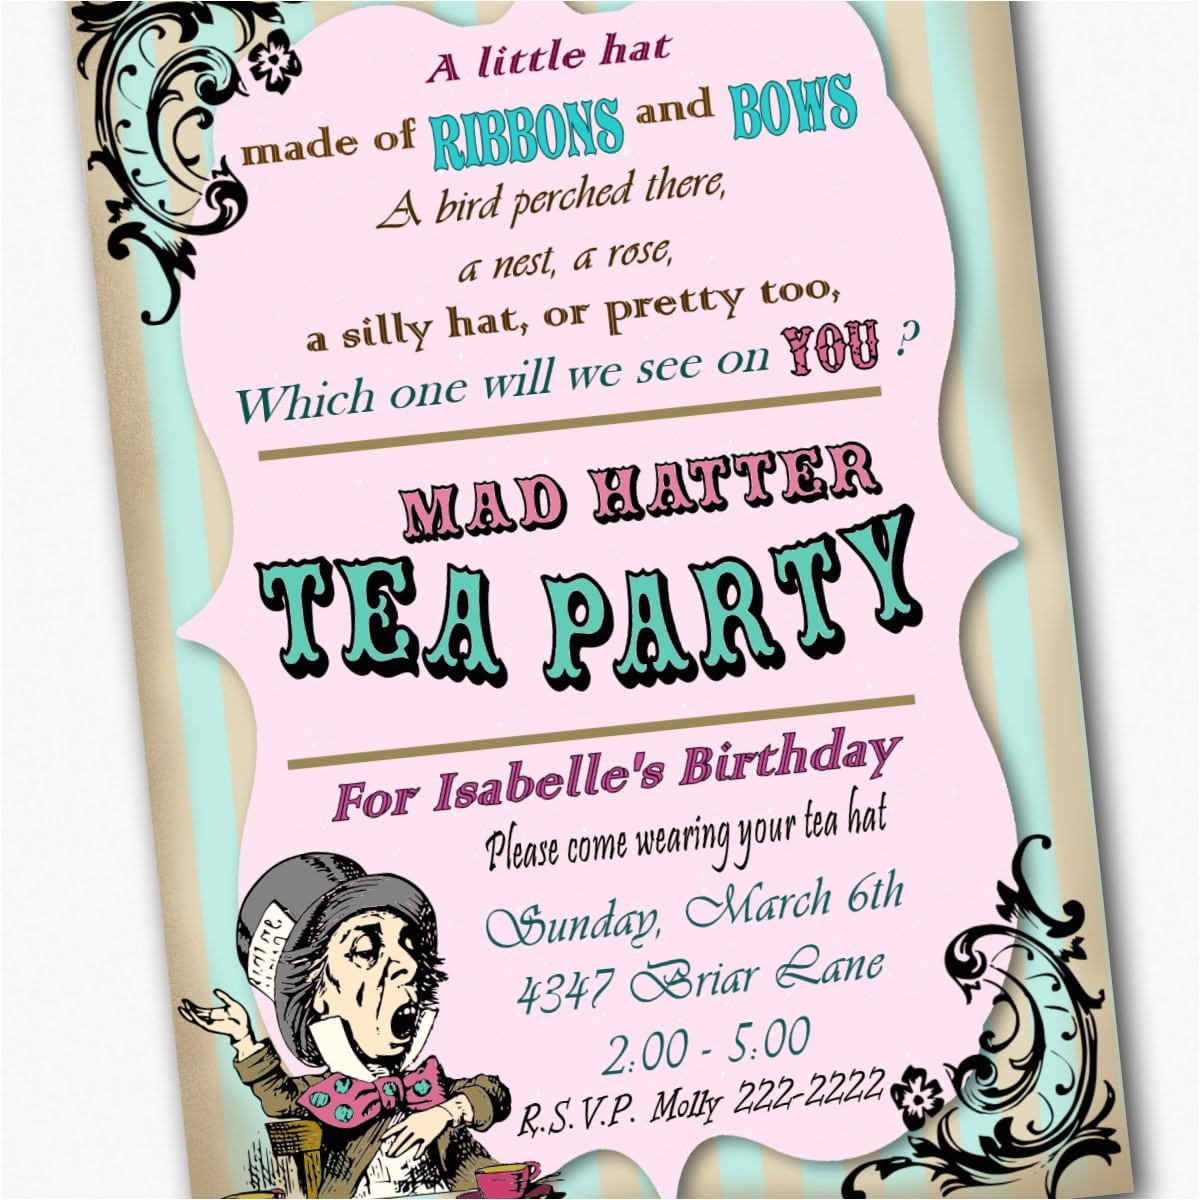 Mad Hatter Tea Party Invitations Free Printable Free Mad Hatter Template Invitation